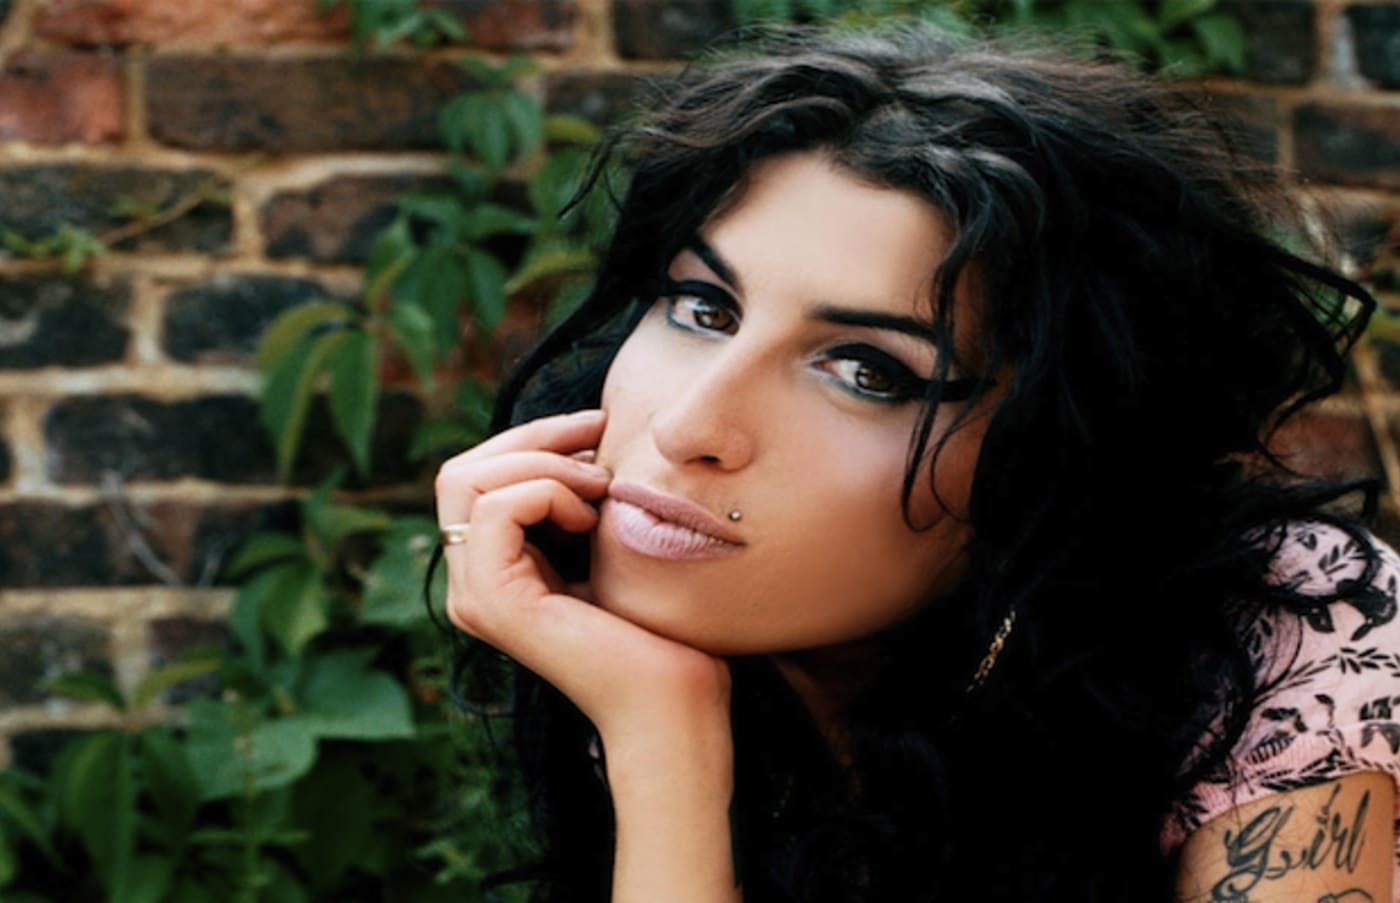 Second Inquest Into Amy Winehouse Death Confirms Alcohol As The Cause Complex